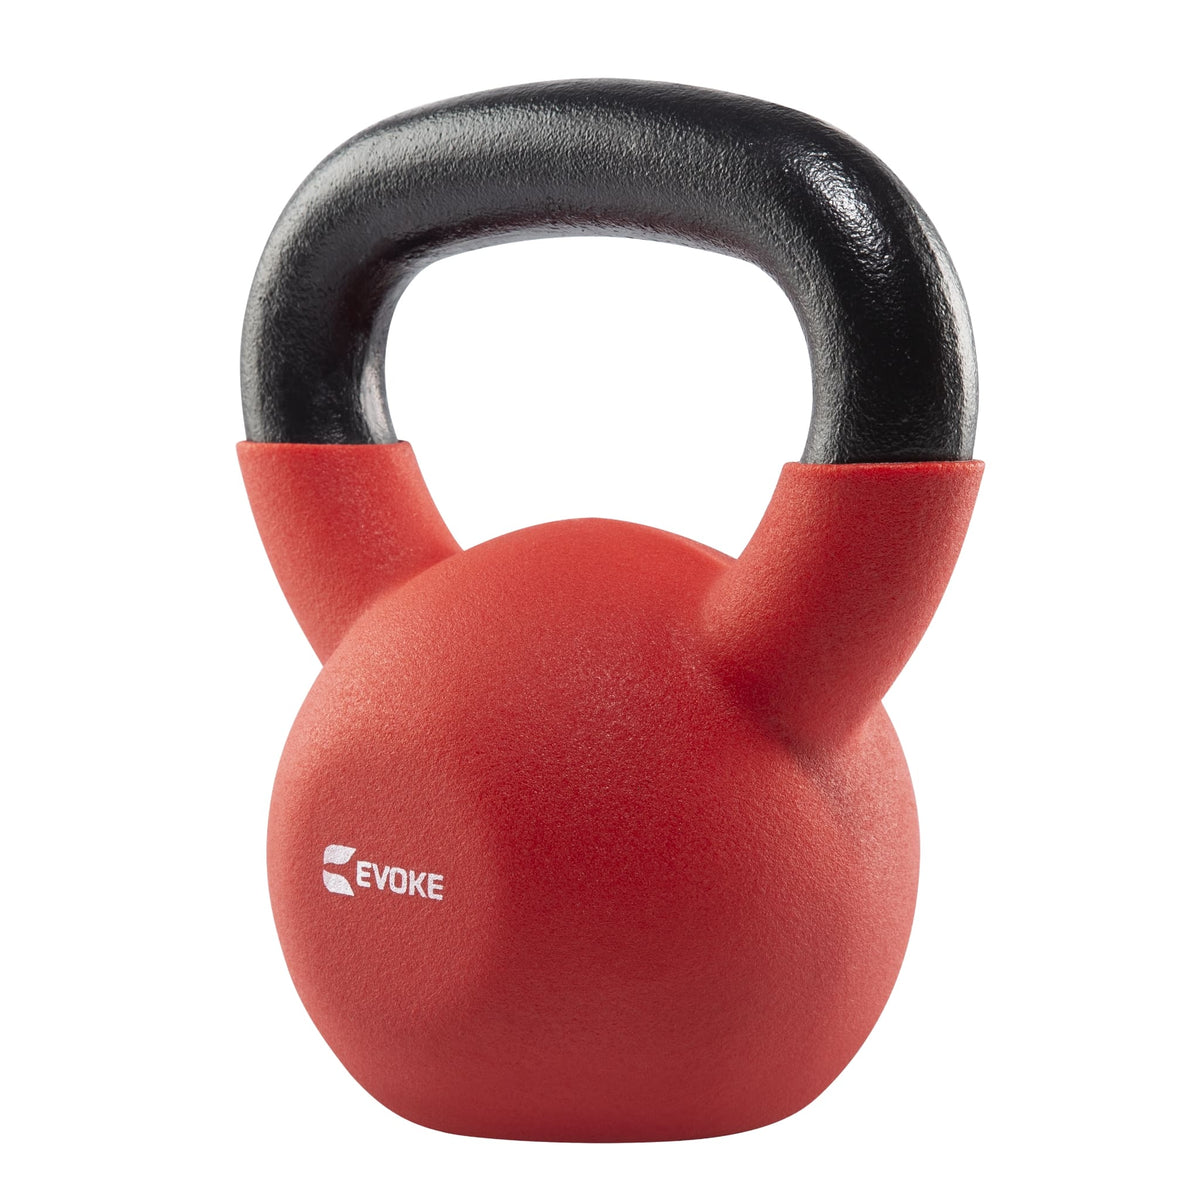 Pure2Improve Deluxe Kettlebell With Surface Friendly Protective Coating 6kg